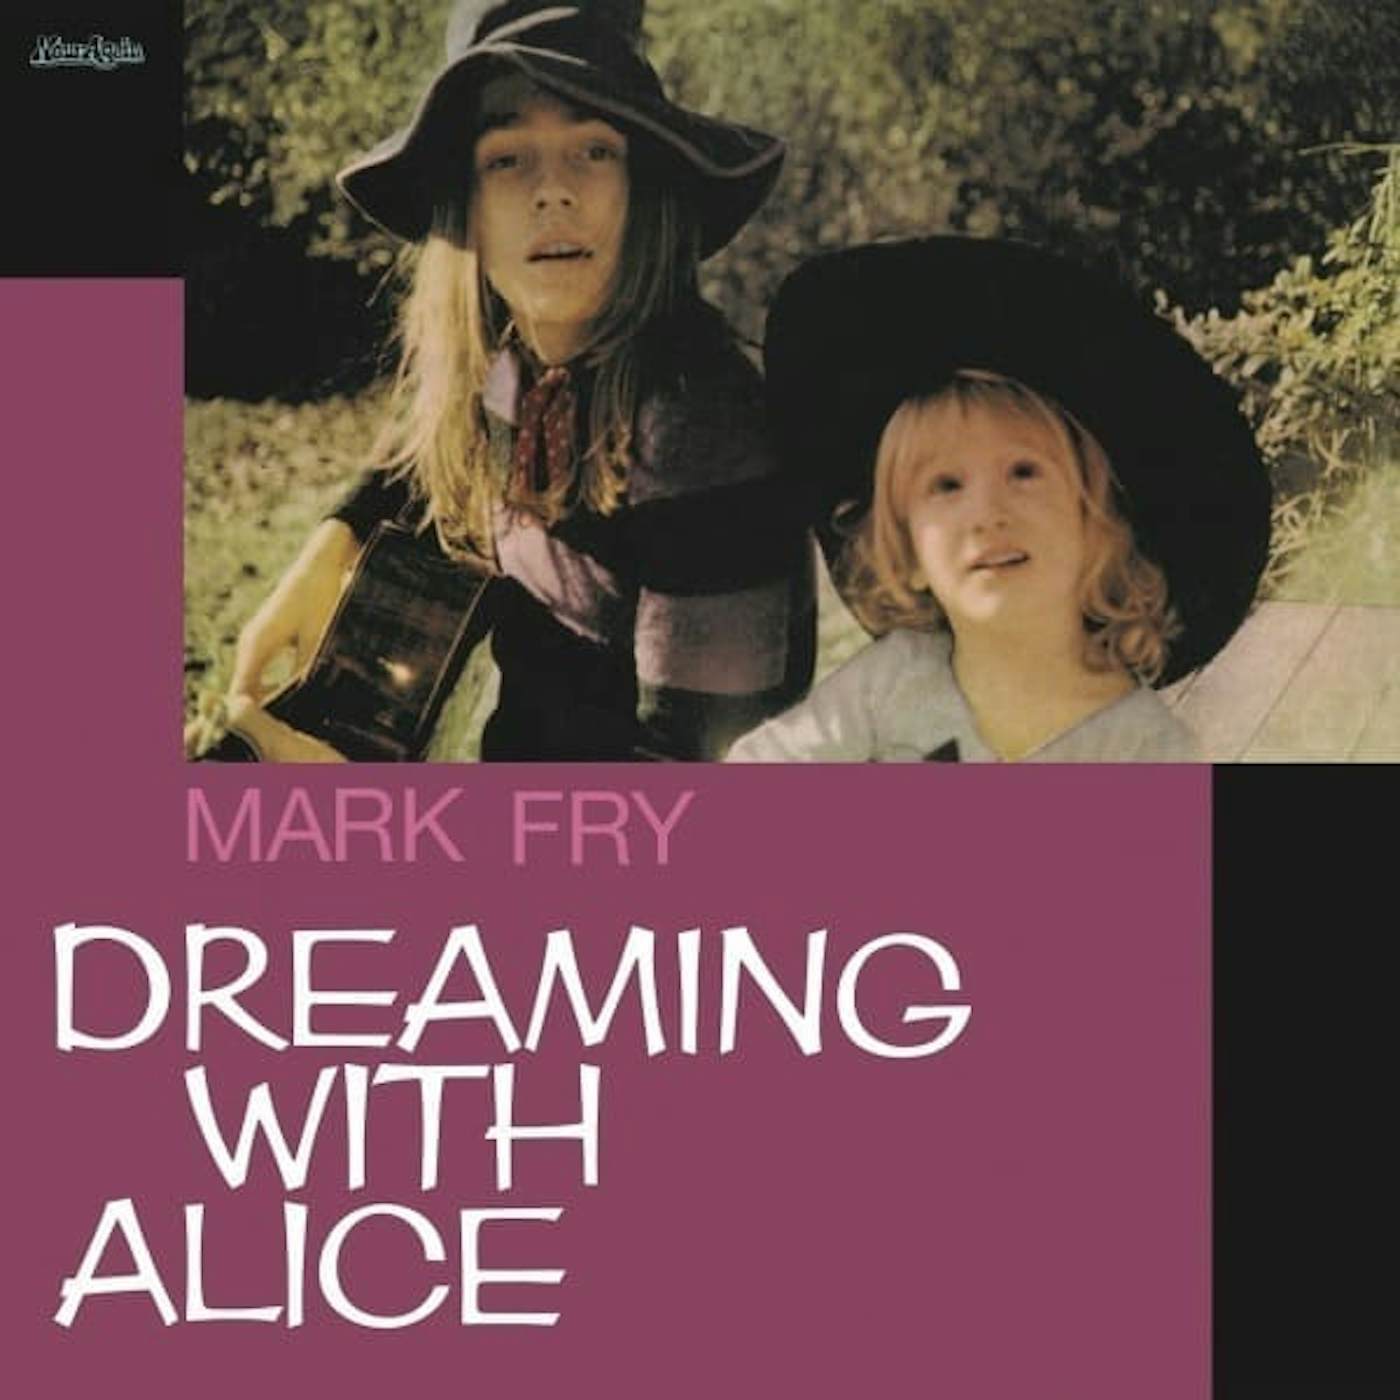 Mark Fry DREAMING WITH ALICE Vinyl Record